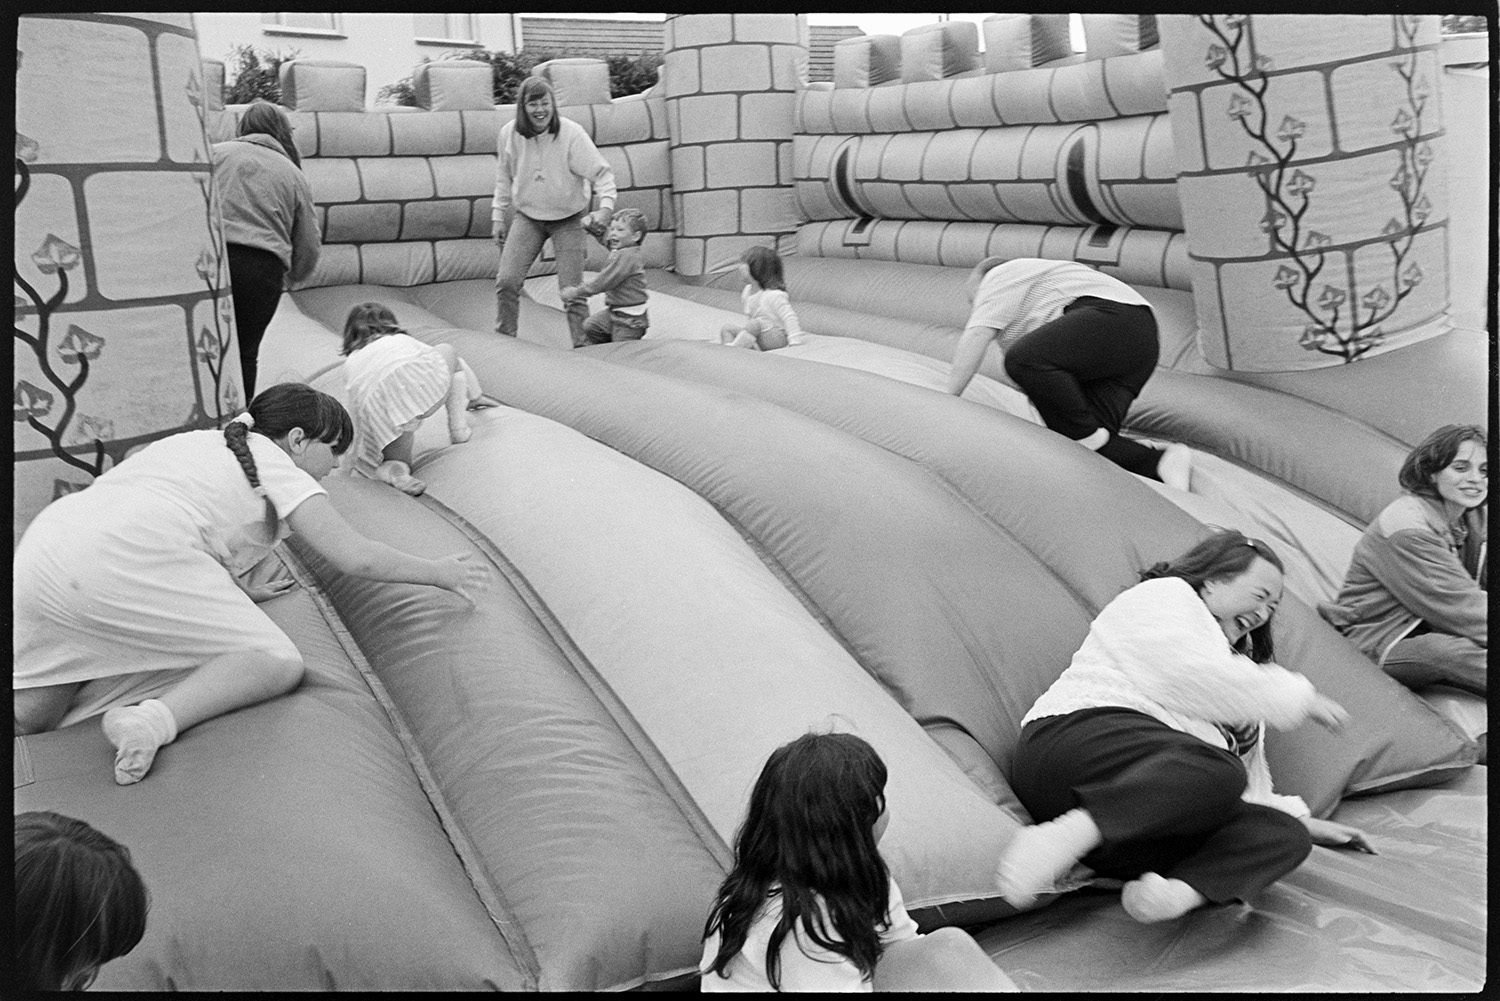 Village Club Day, sports, teas, clay pigeon shoot, committee in discussion.
[Children climbing and falling over on the bouncy castle at the Village Club Day at Chawleigh. A woman is supervising the children on the bouncy castle.]